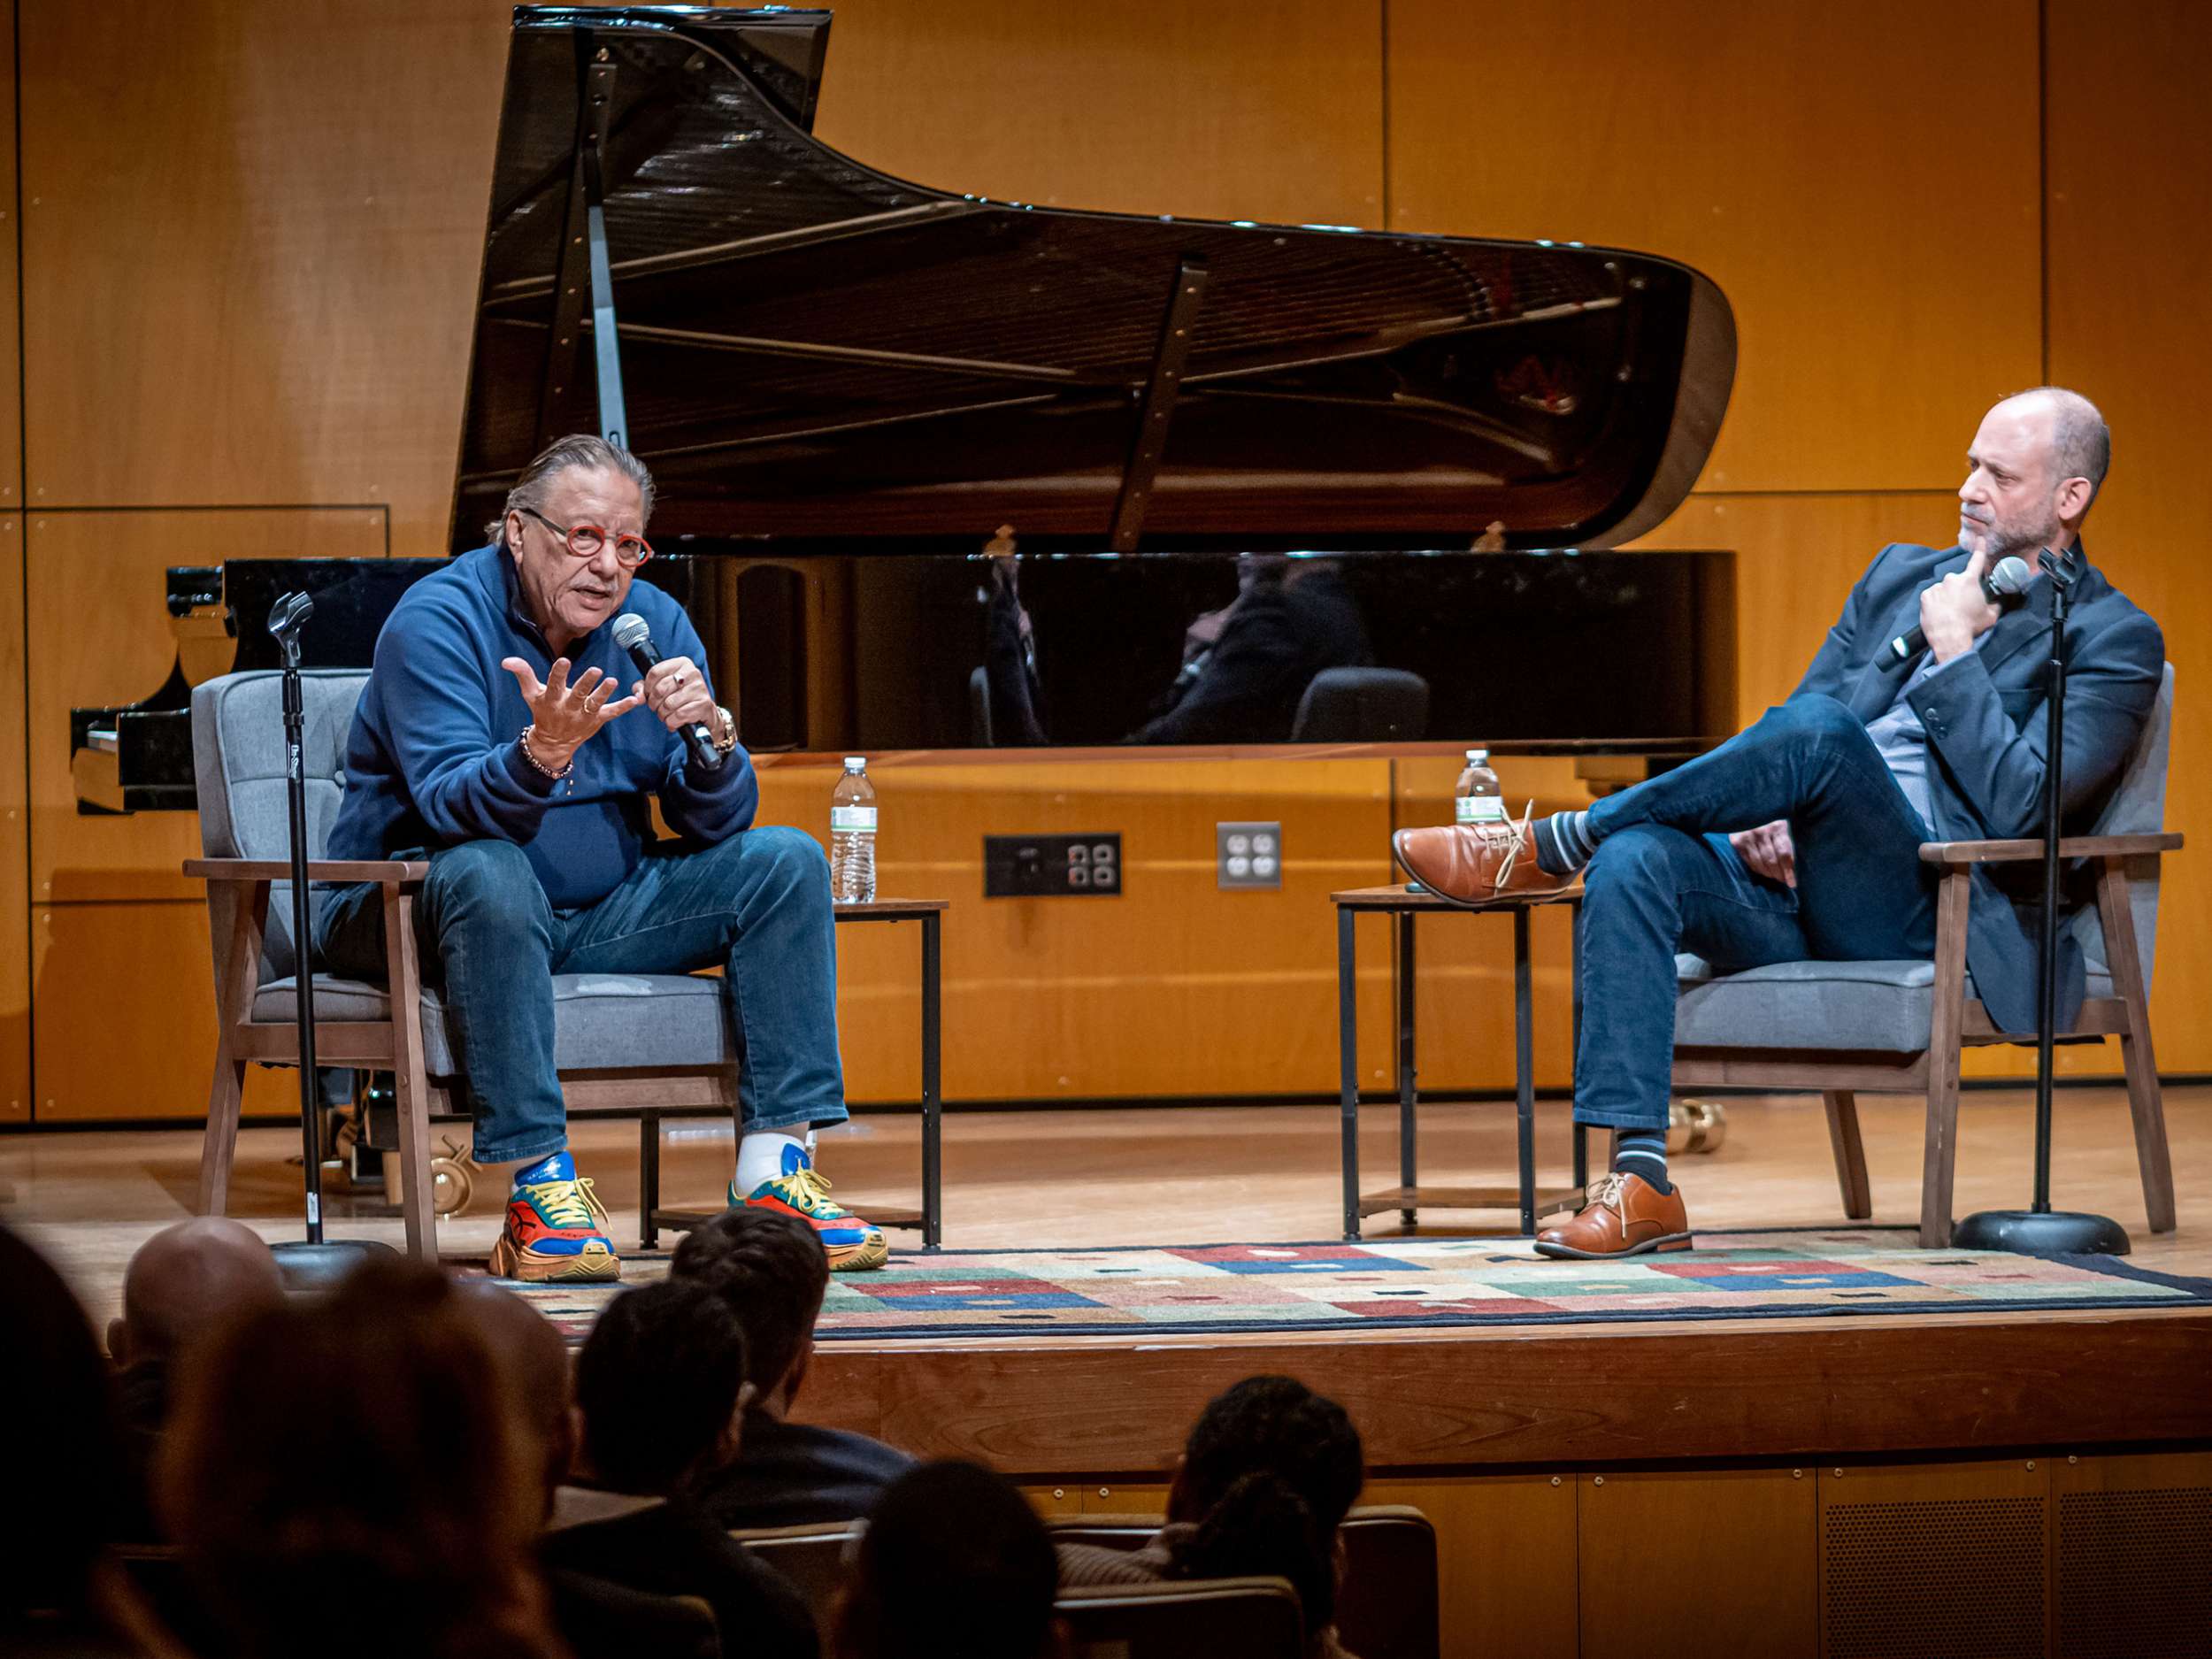 Arturo Sandoval sits in a chair and speaks into a microphone while on stage with Anthony Mazzocchi.